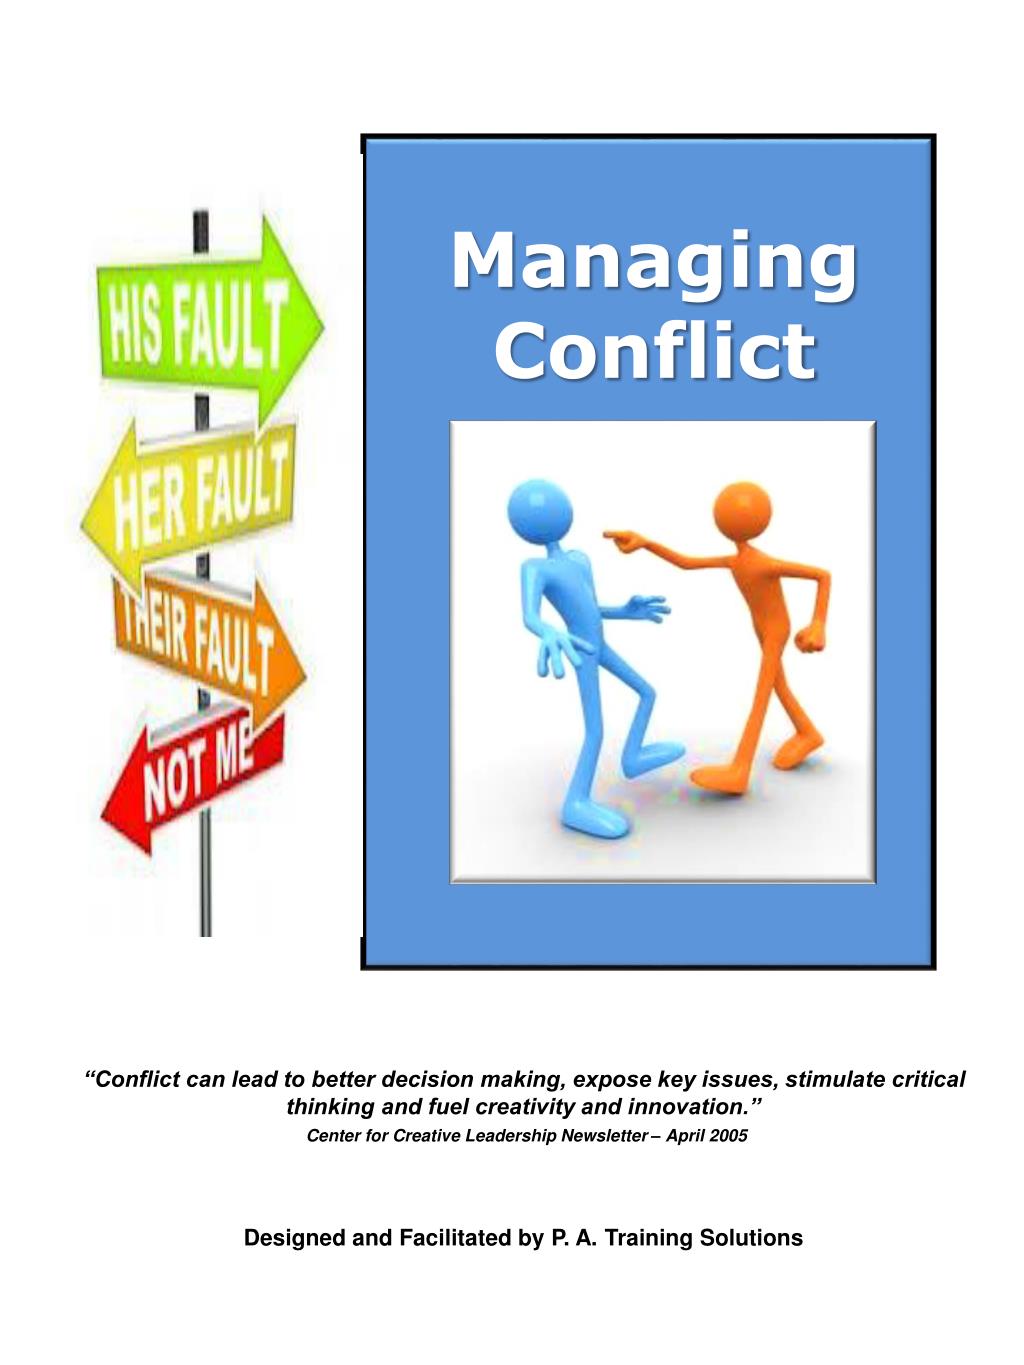 assignment 3 conflict management shadow health